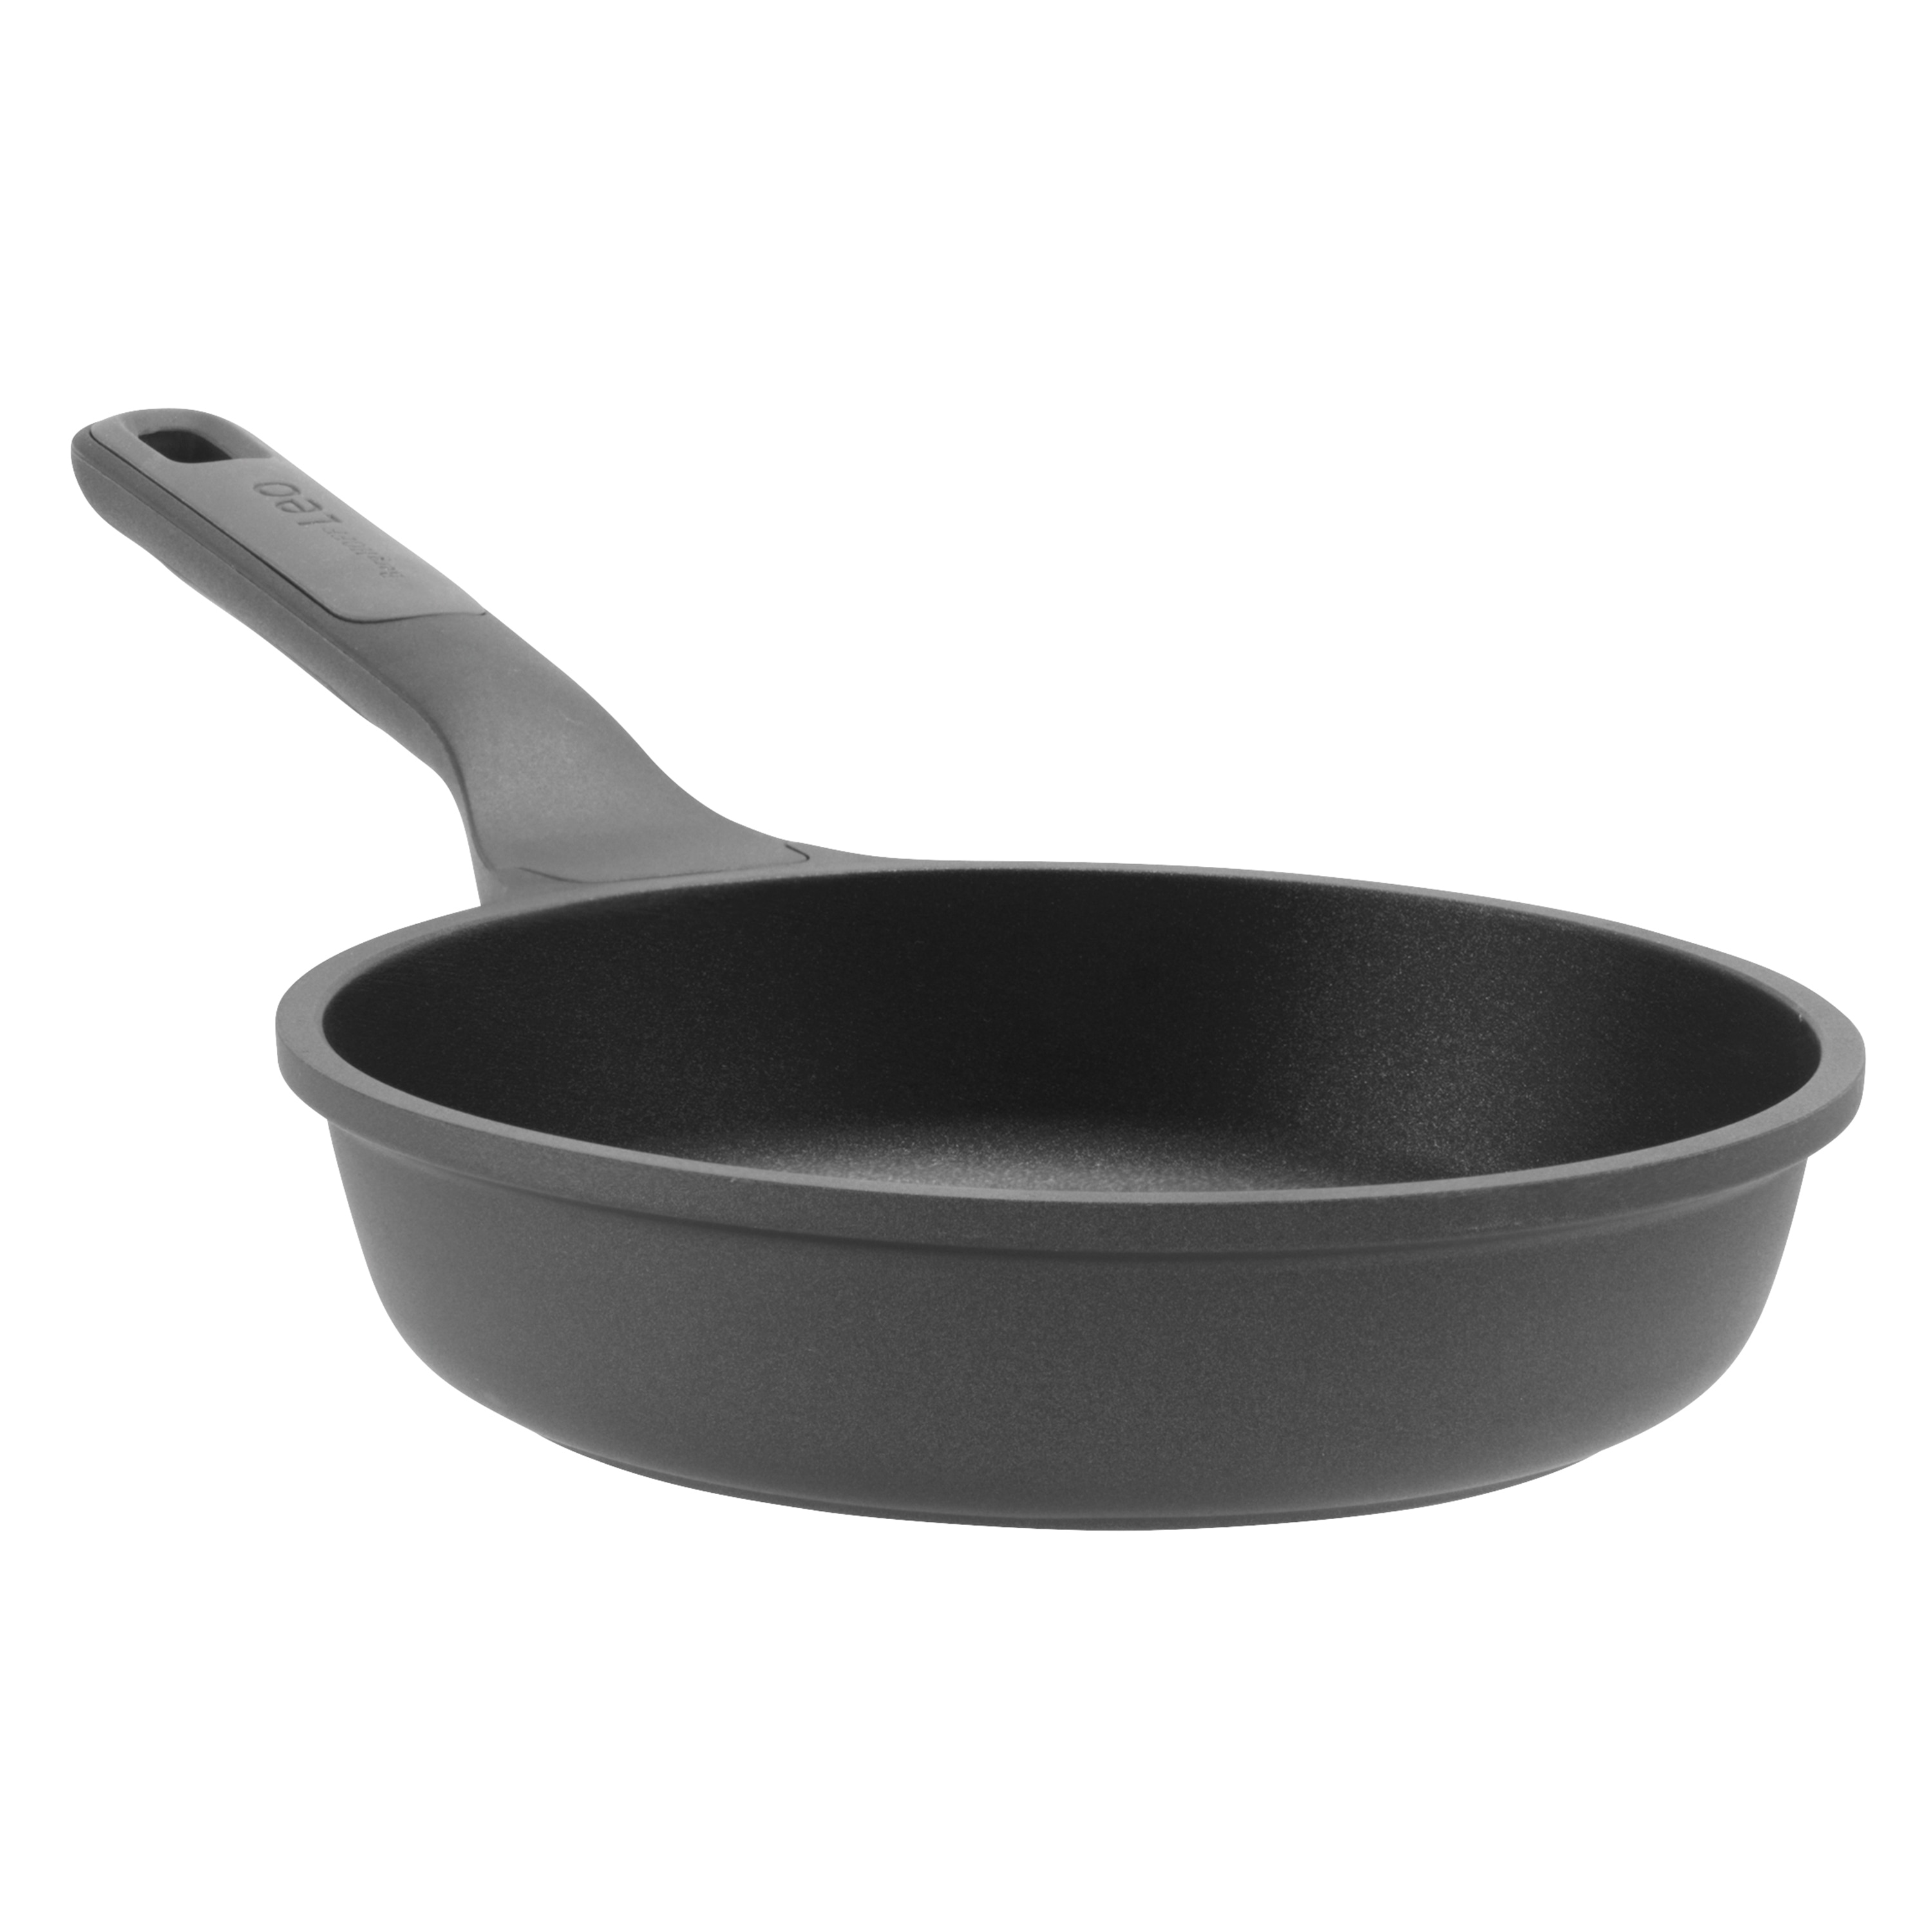 https://ak1.ostkcdn.com/images/products/is/images/direct/3c5537d745ce120713d71889cca50895e16769cc/Stone-8%22-NS-Fry-Pan%2C-1.3Qt.jpg